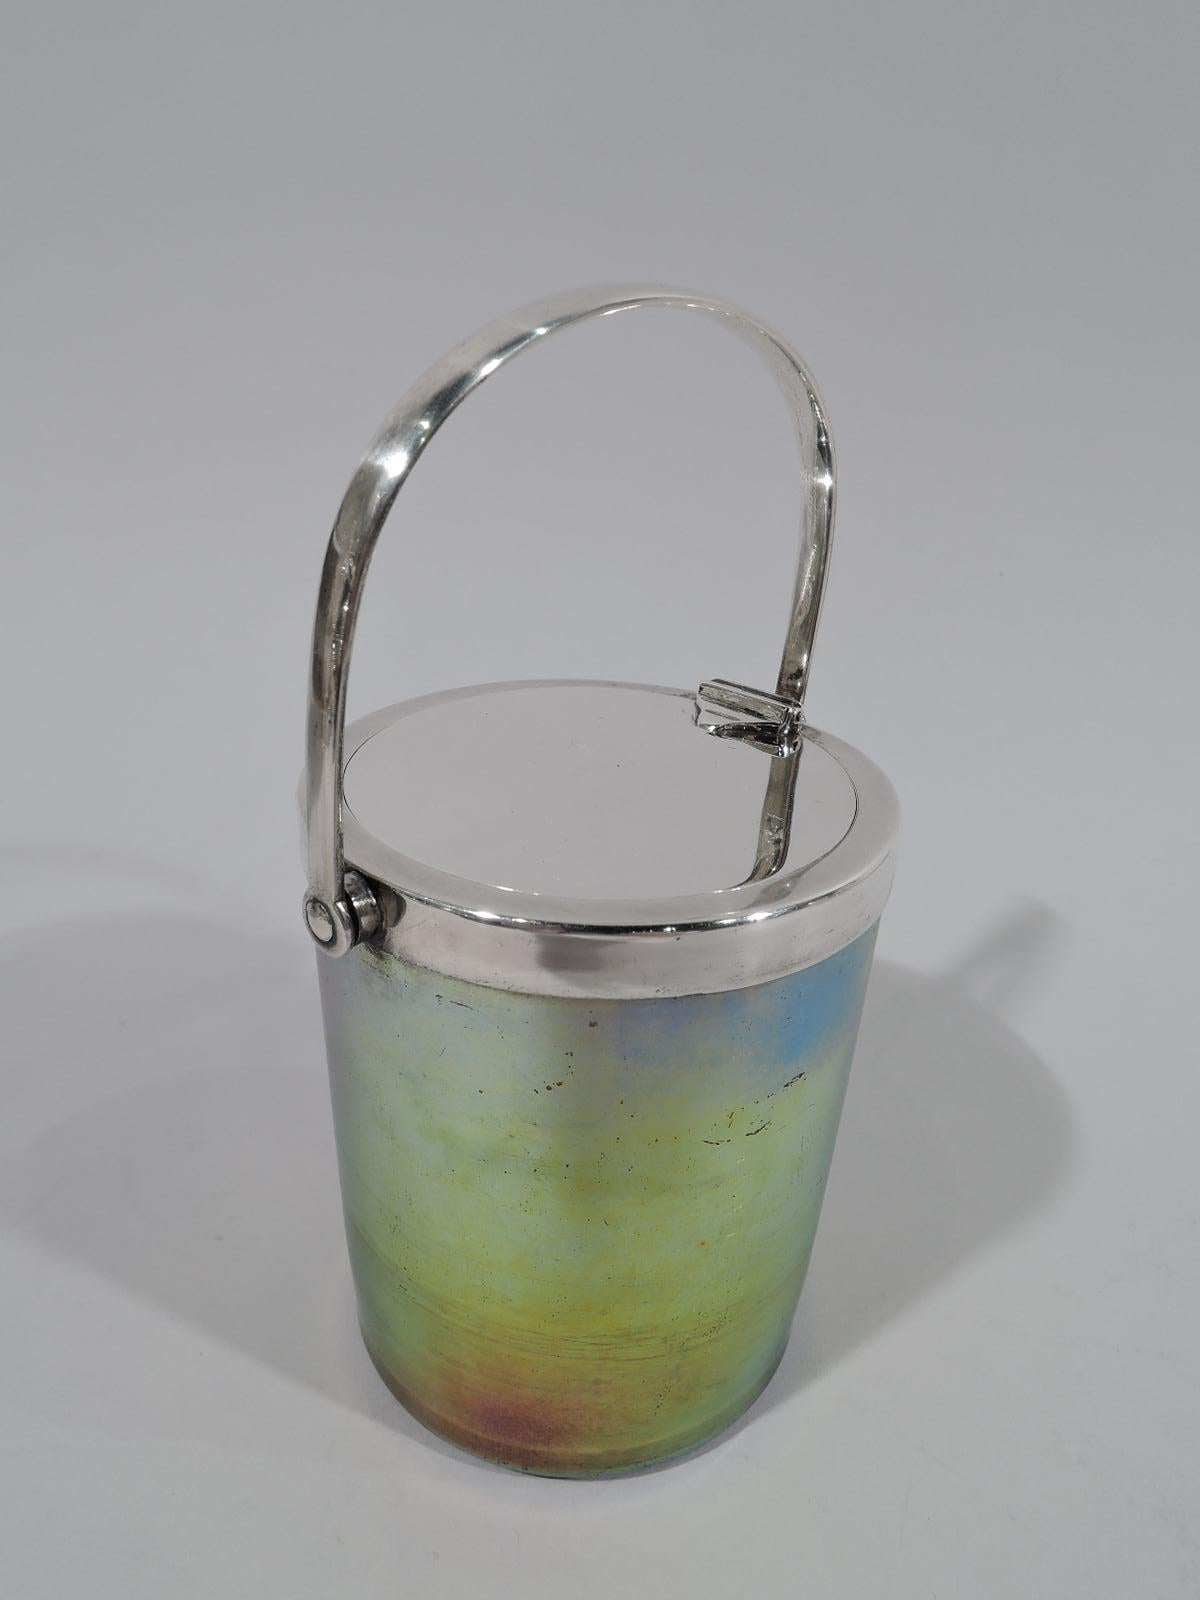 Beautiful Art Nouveau sterling silver and Favrile glass jam pot, circa 1910. Made by Tiffany & Co. in New York. Cylindrical with straight sides. Glass greenish-gold with patches of blue and red. Pontil mark. Silver collar with flat hinged cover that